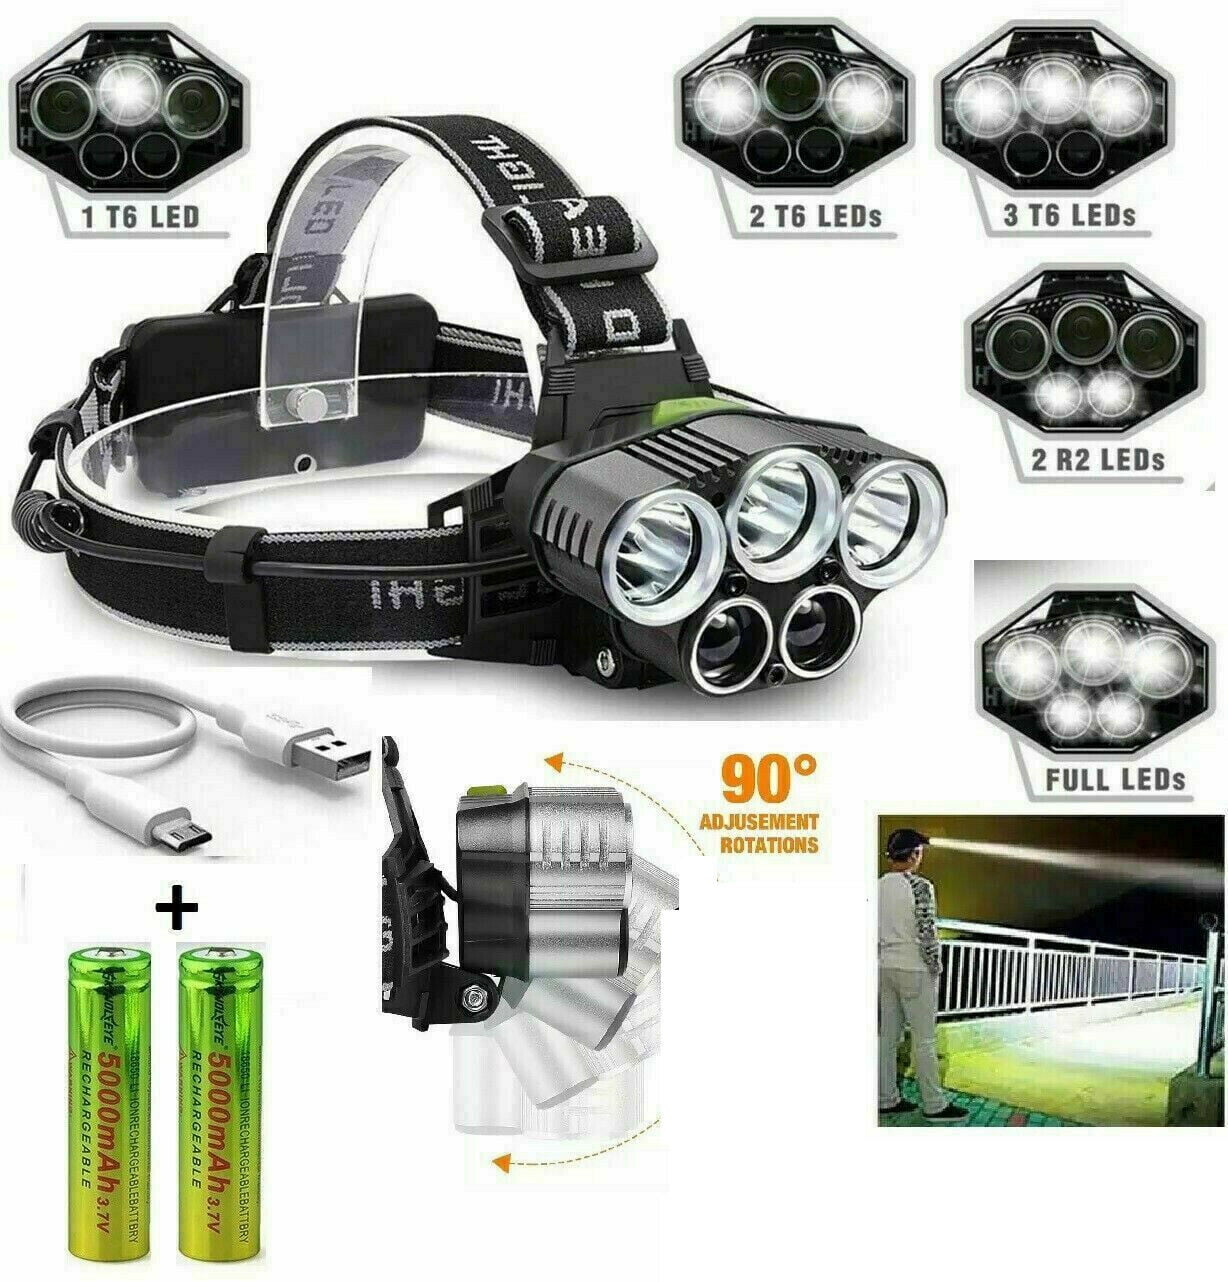 New Headlamp 90000LM Rechargeable T6 LED Headlight Flashlights Head Torch 